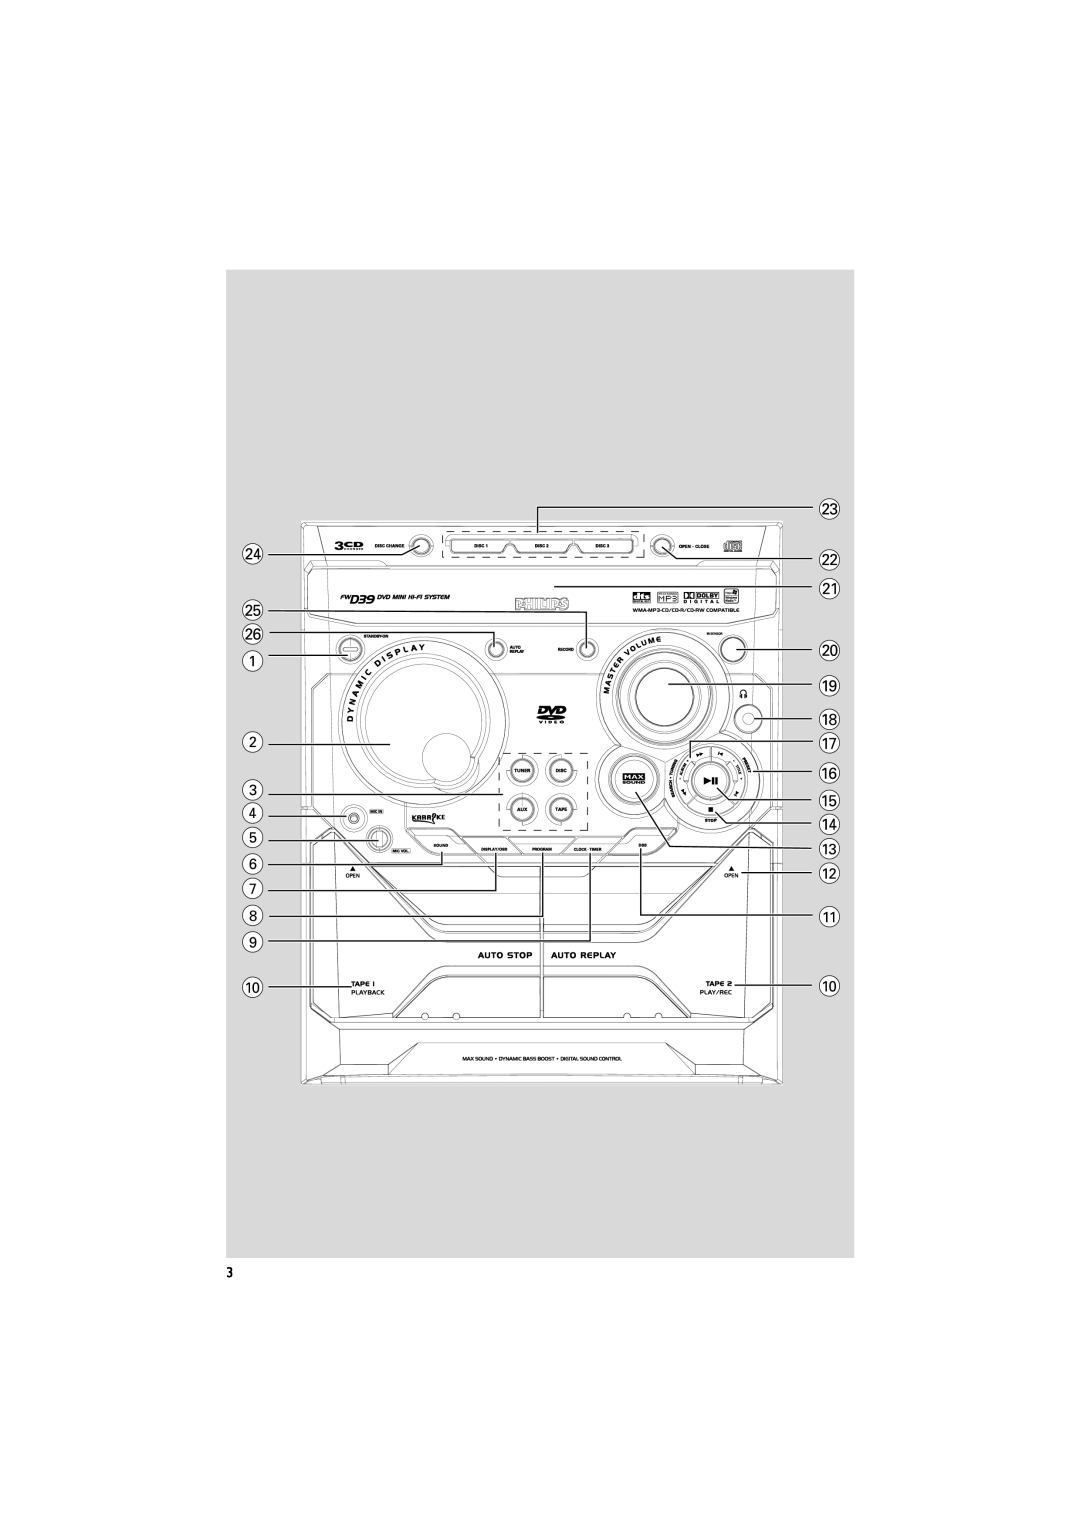 Philips FWD39/ 21 manual 